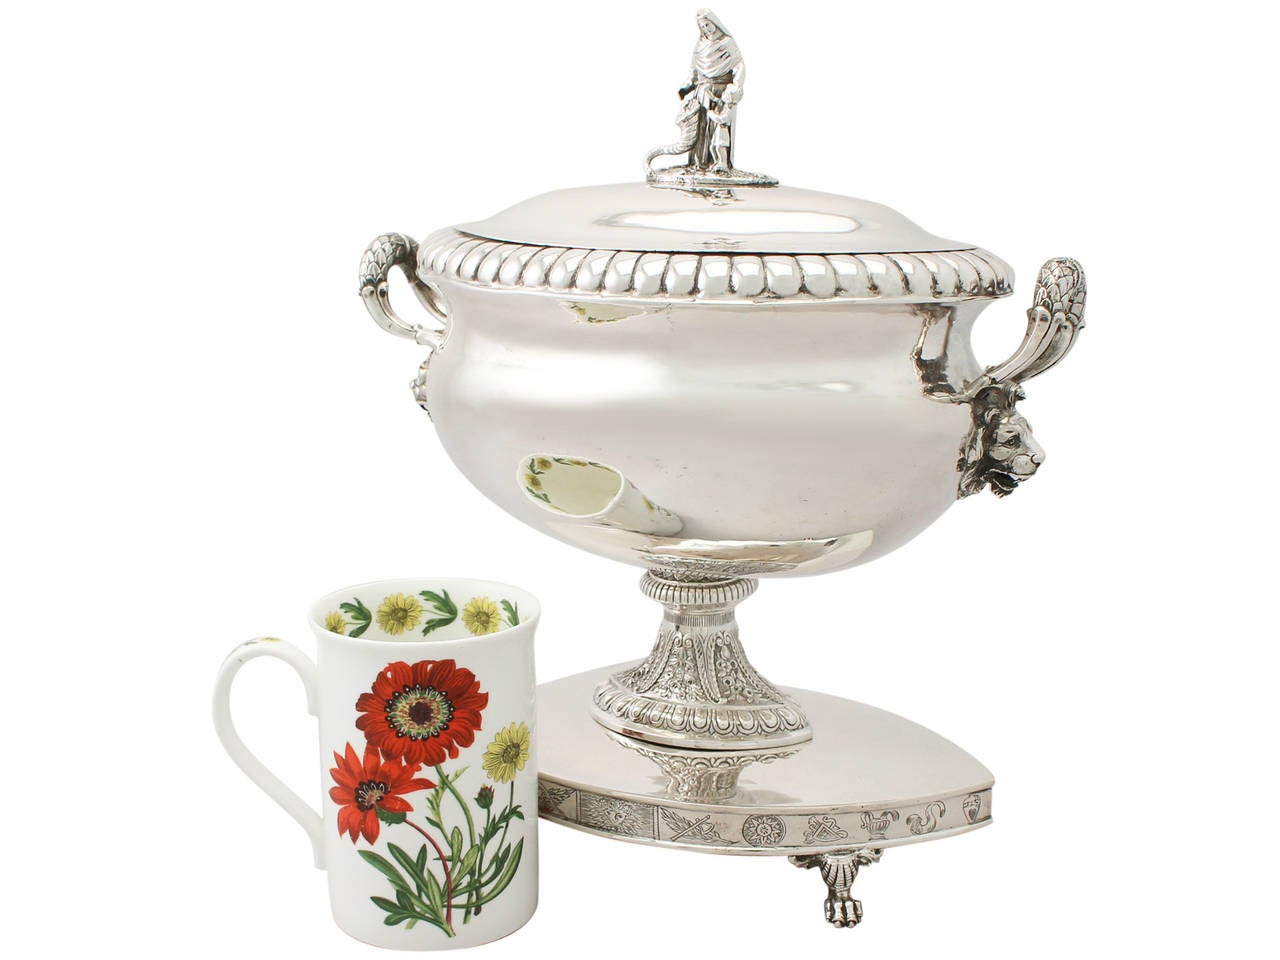 A fine and impressive antique German silver tureen; an addition to our diverse dining silverware collection.

This fine antique German silver tureen has an oval rounded form onto a pedestal foot and navette shaped base.

The body of this German